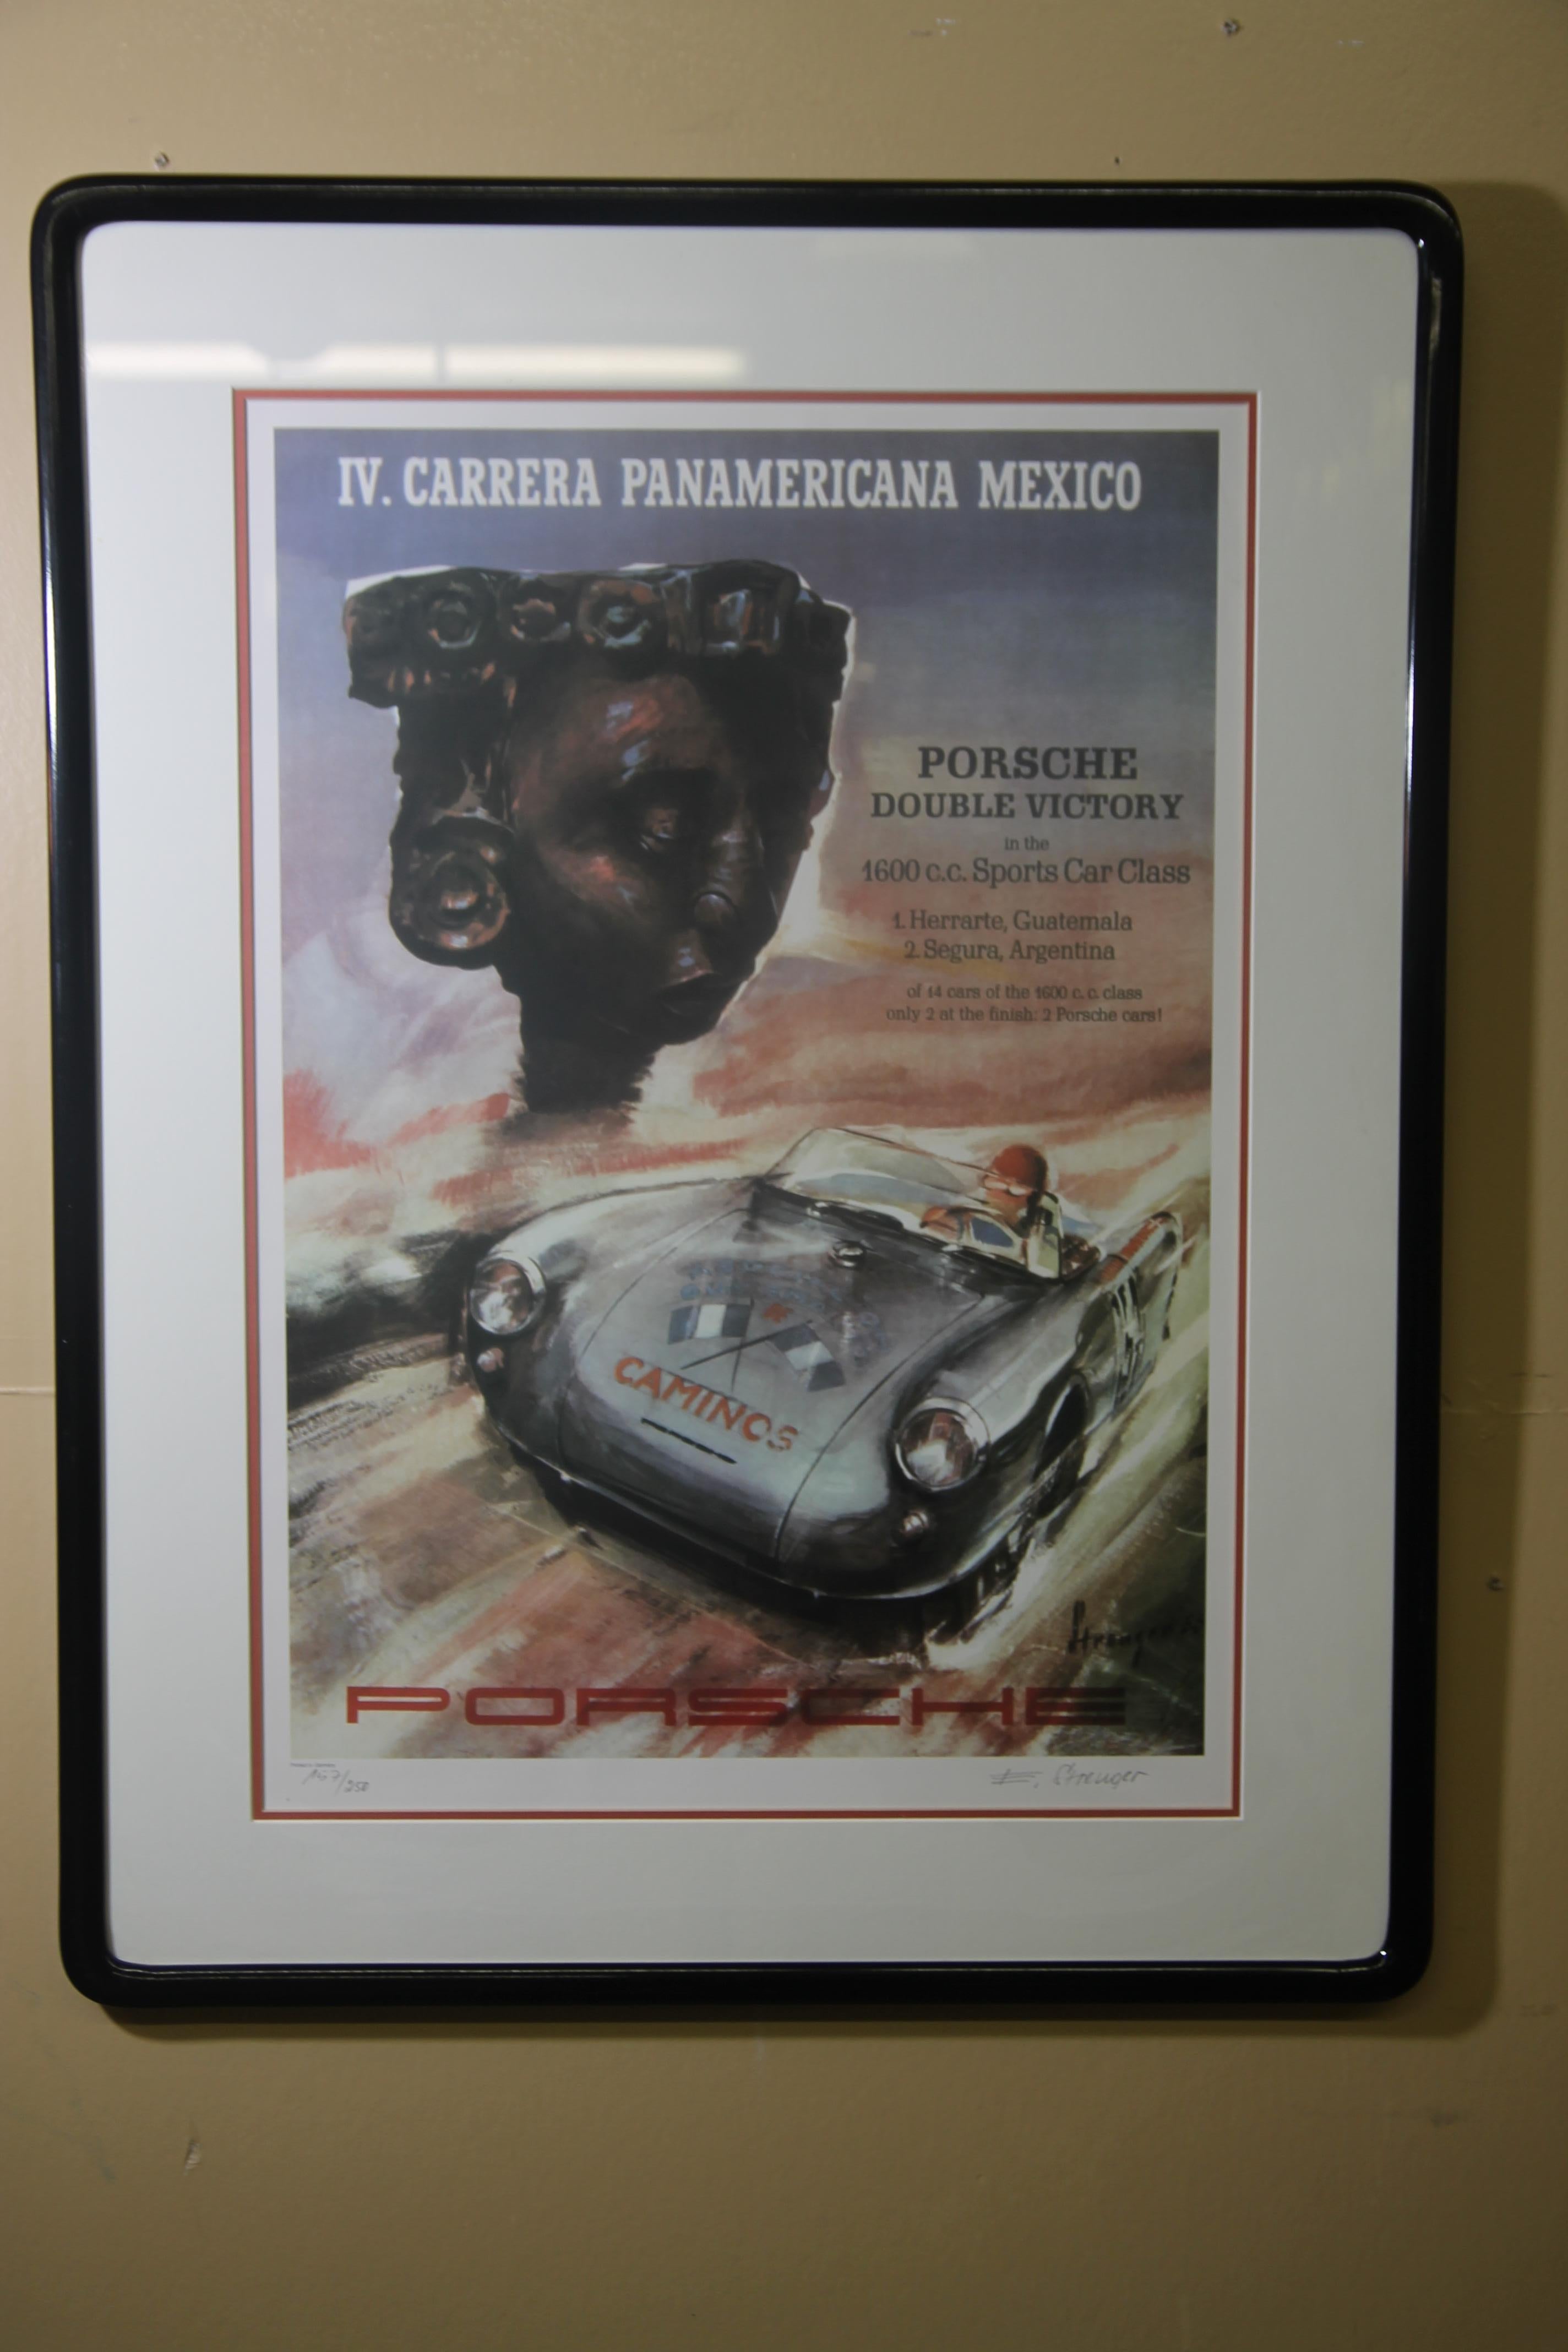 I'm excited to offer for sale a suite of 5 signed and numbered prints by Erich Strenger. Strenger was the man that put Porsche art on the map. Erich had a 30 plus year relationship with Porsche from the 50's until the 80's and his influence is still